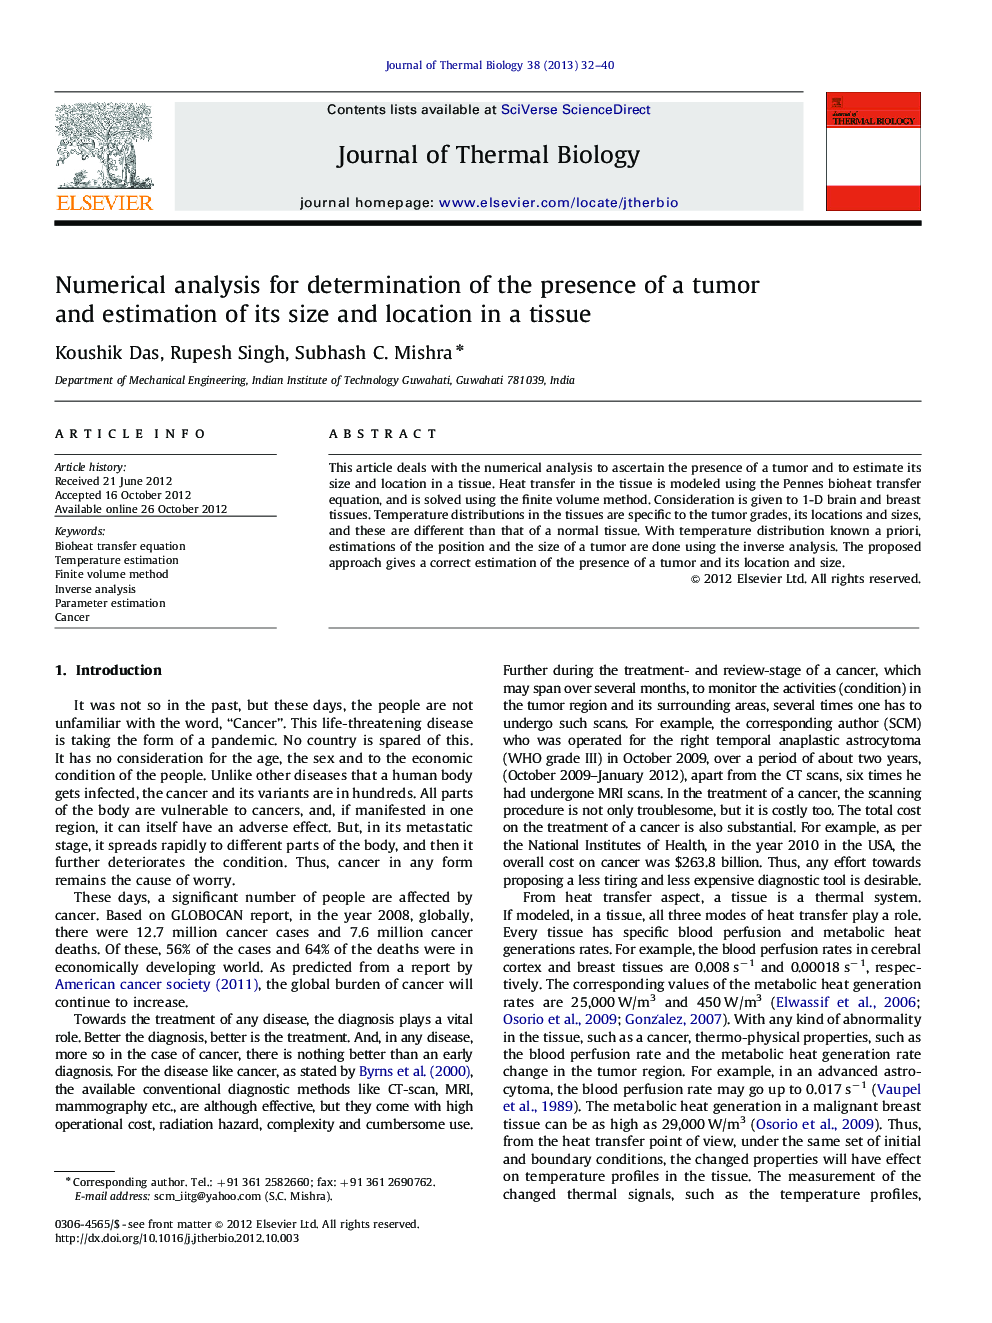 Numerical analysis for determination of the presence of a tumor and estimation of its size and location in a tissue